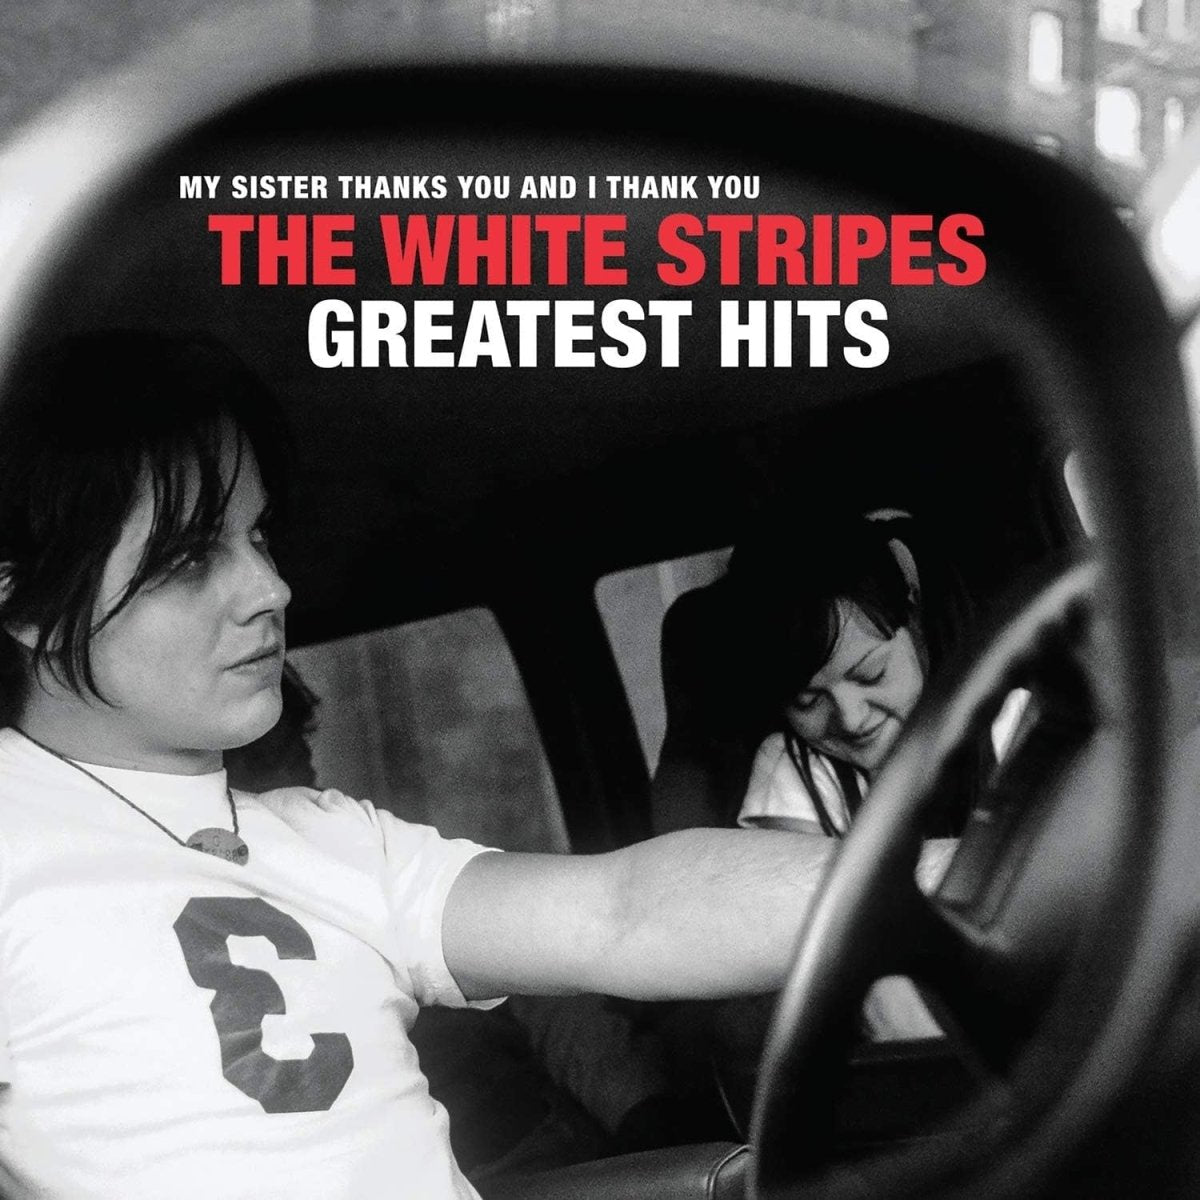 The White Stripes - My Sister Thanks You And I Thank You The White Stripes Greatest Hits Records & LPs Vinyl